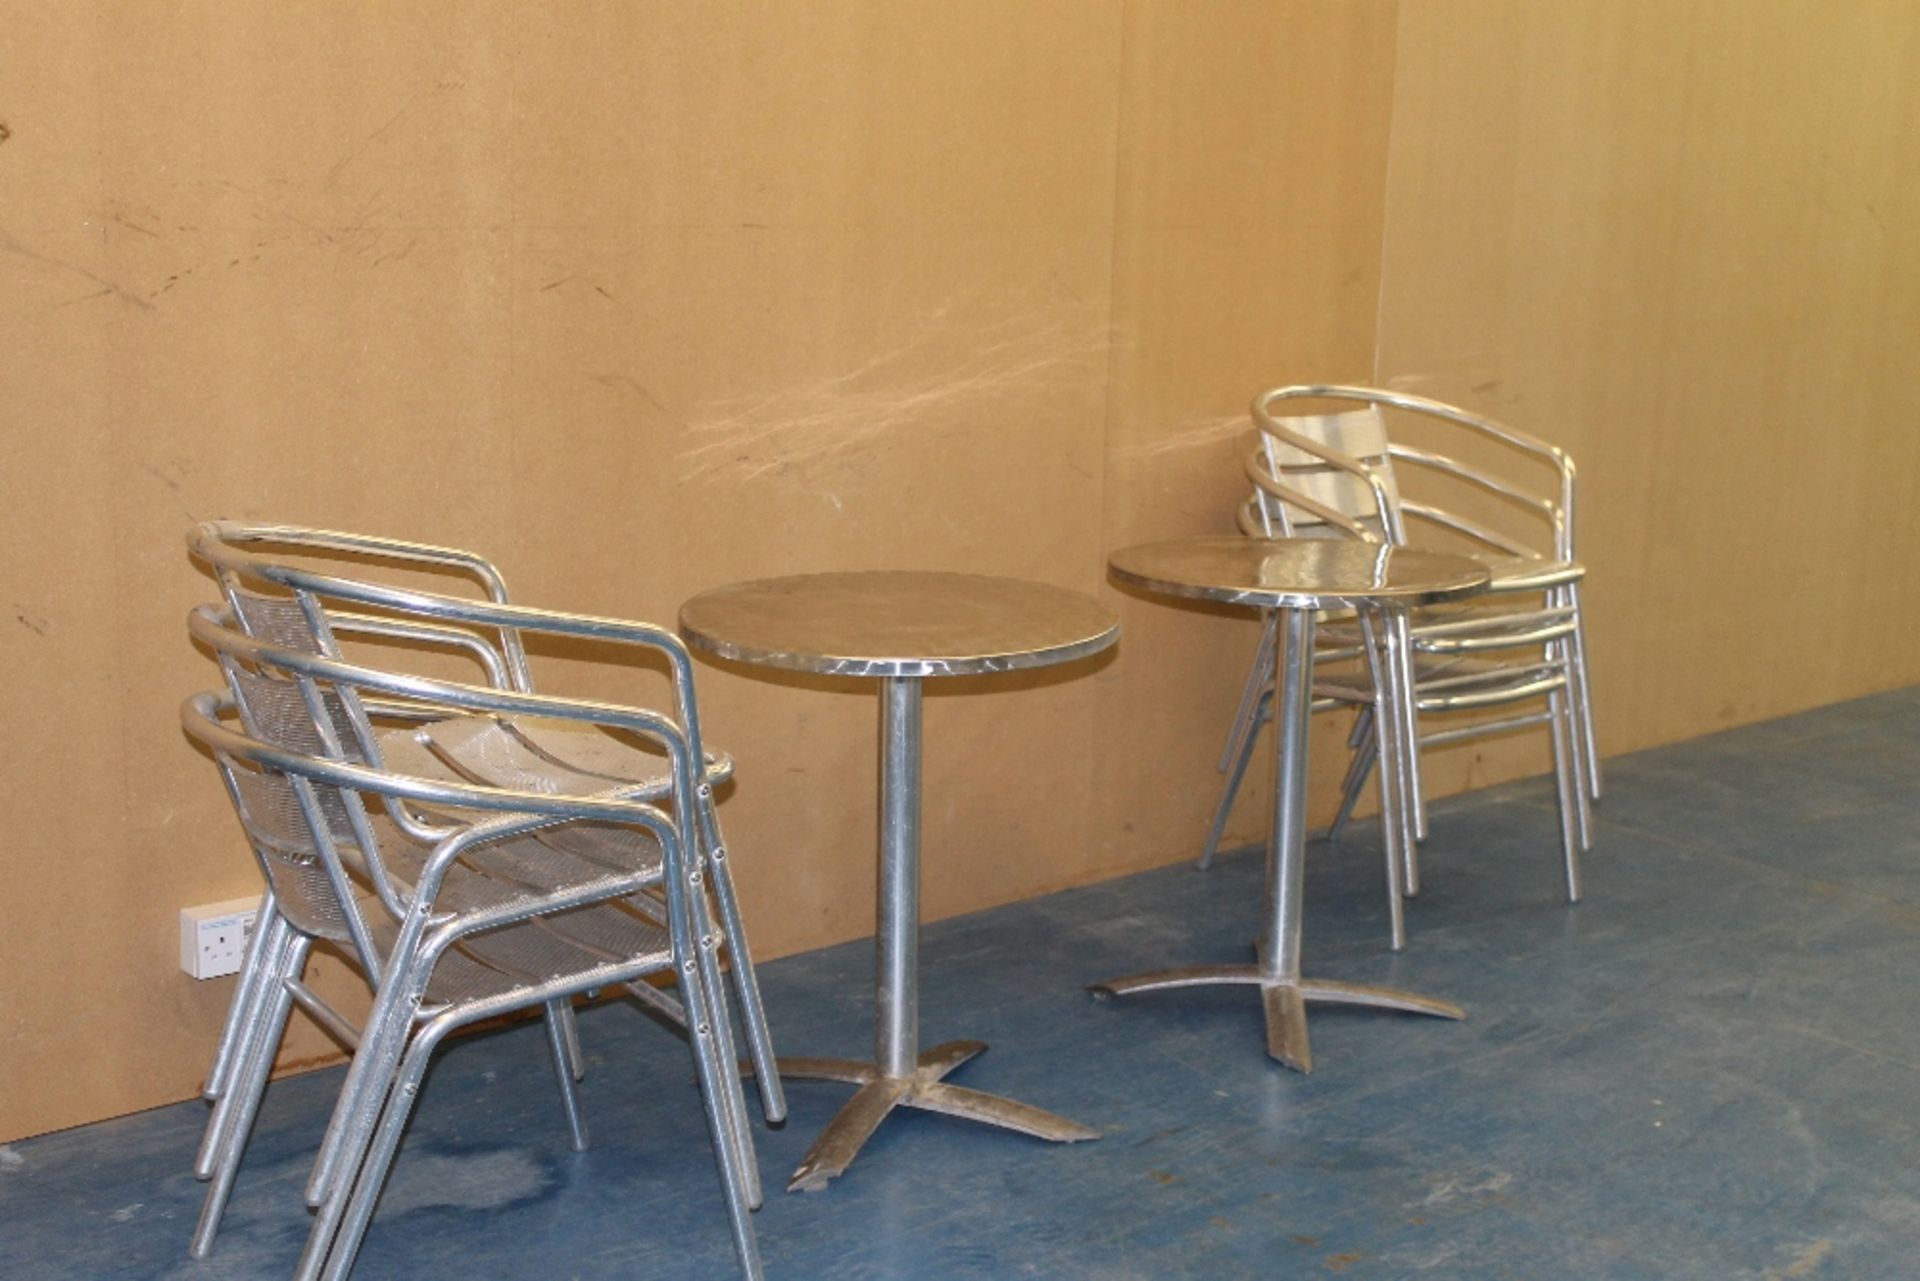 2 Aluminium  Bistro Tables + 6 Matching Chairs – NO VAT - Image 2 of 2